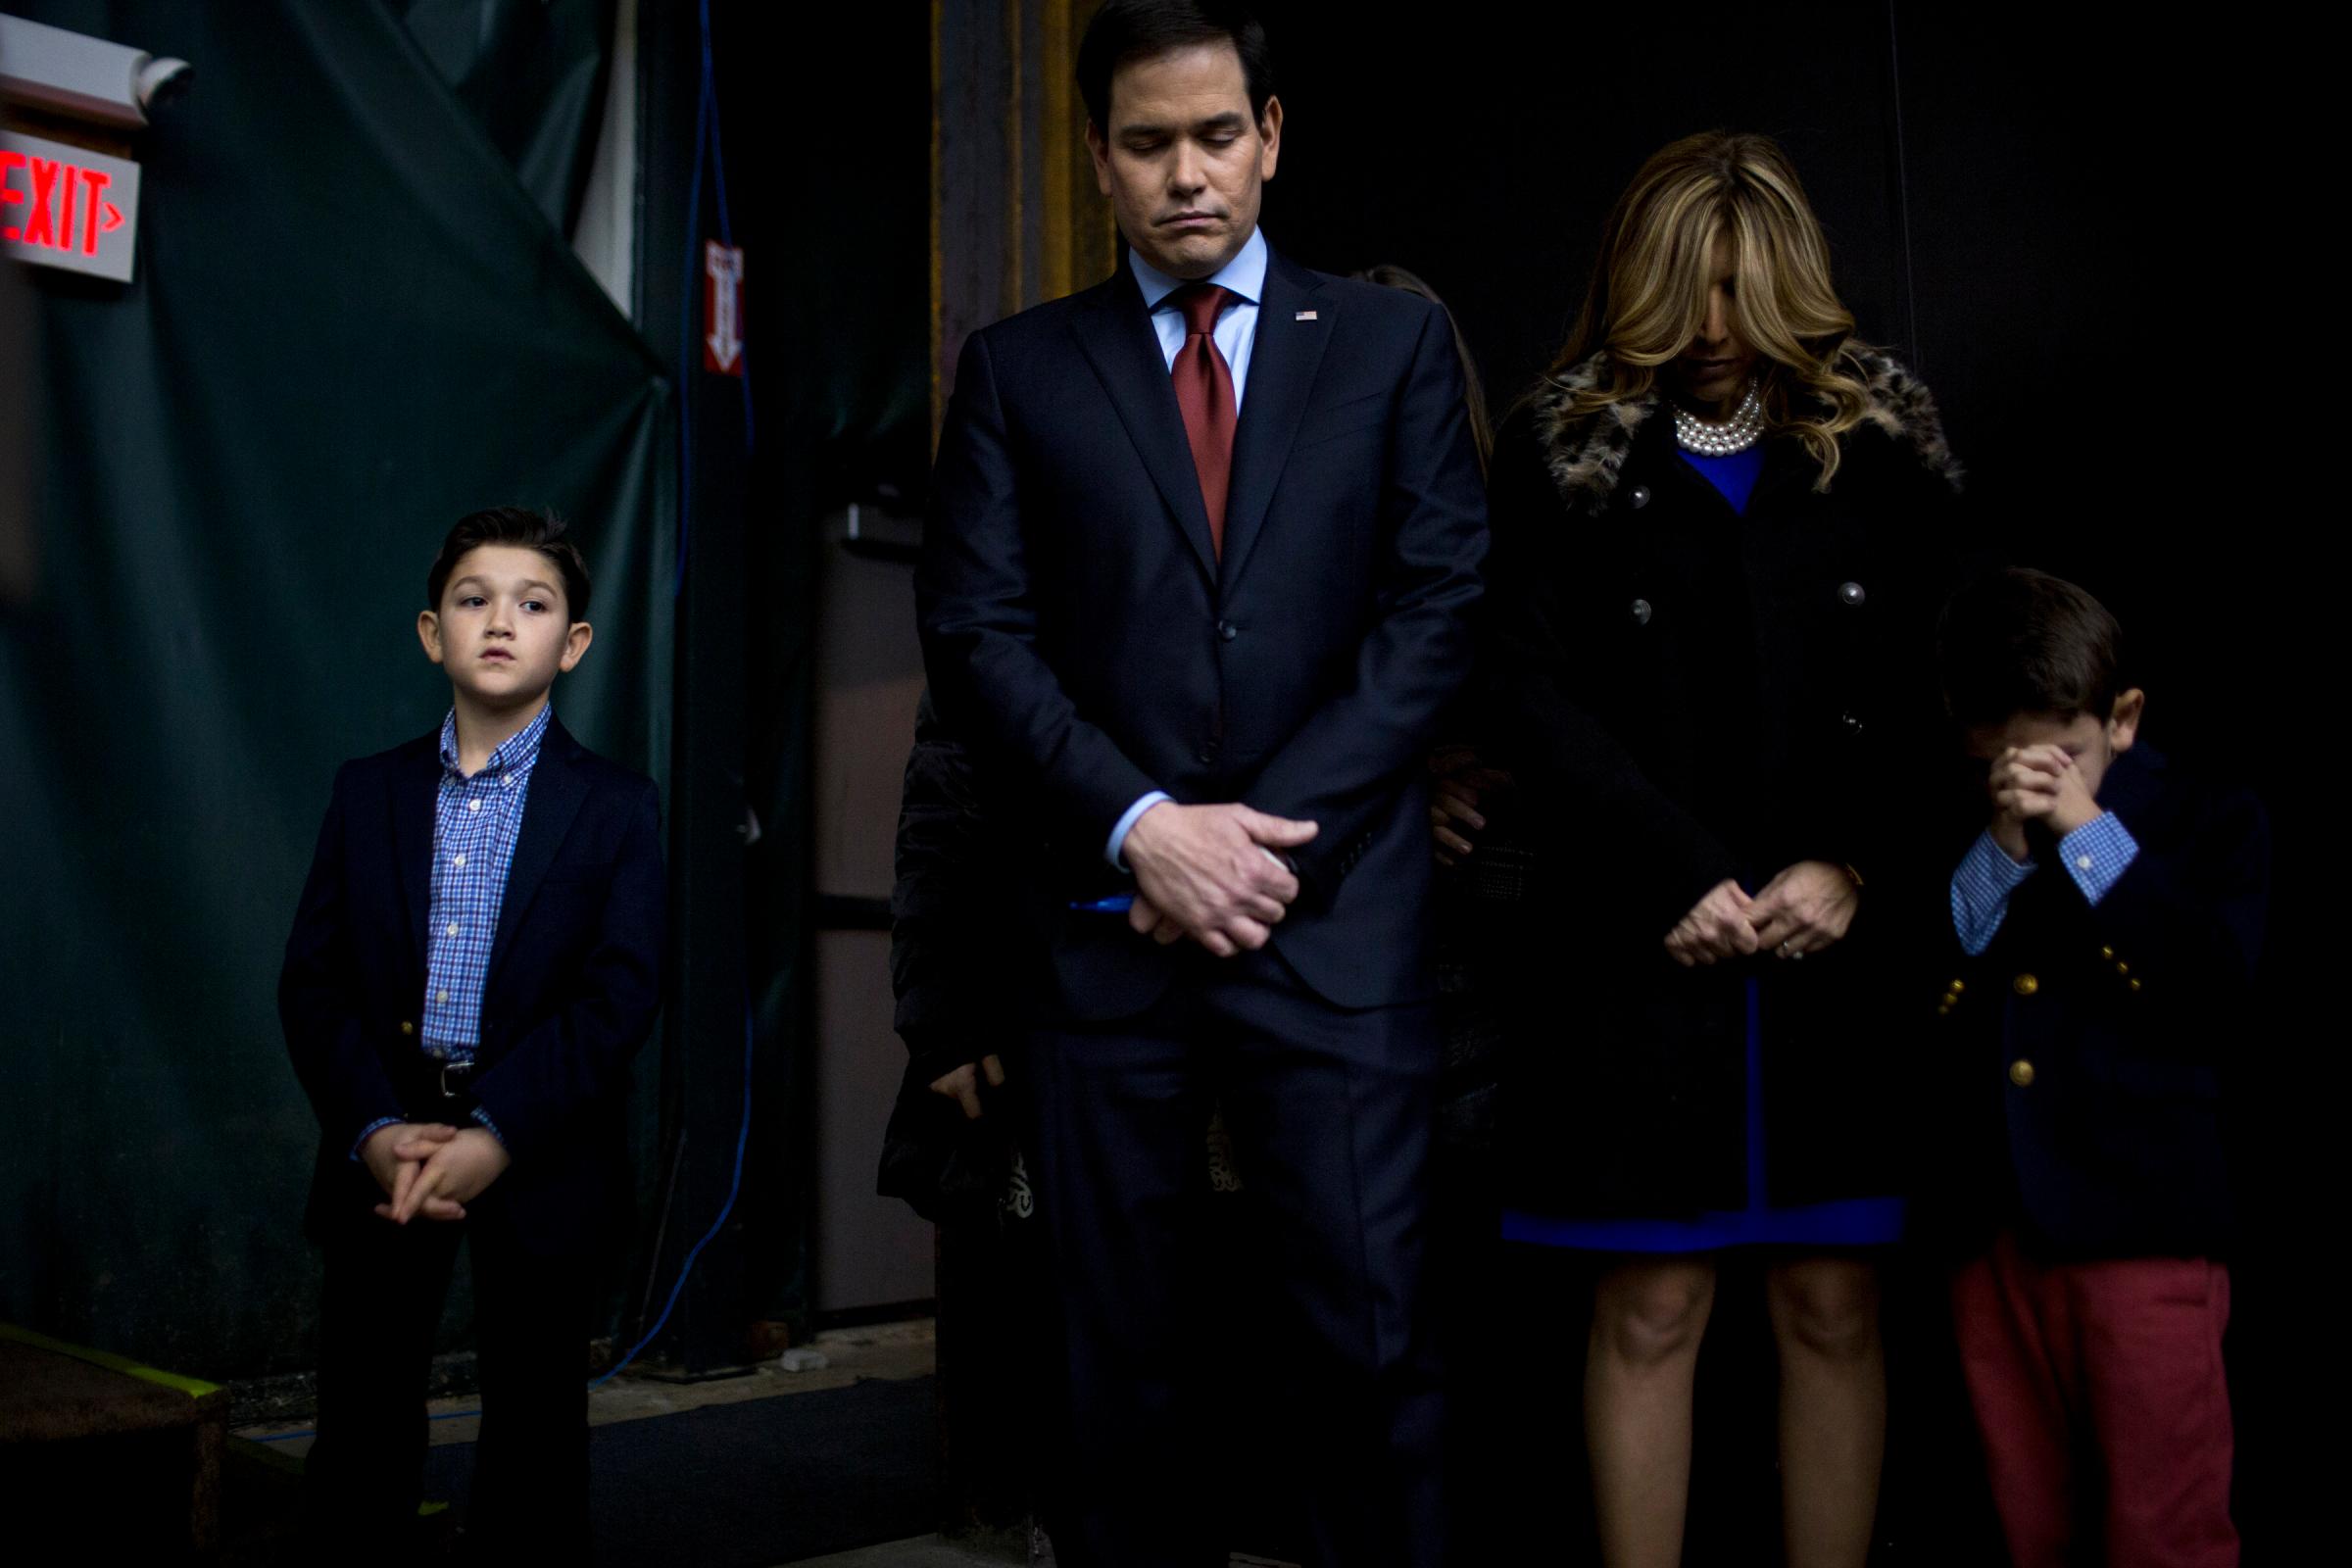 Republican presidential candidate Marco Rubio appears with his family at his caucus location on Feb. 1, 2016, in Clive, Iowa.